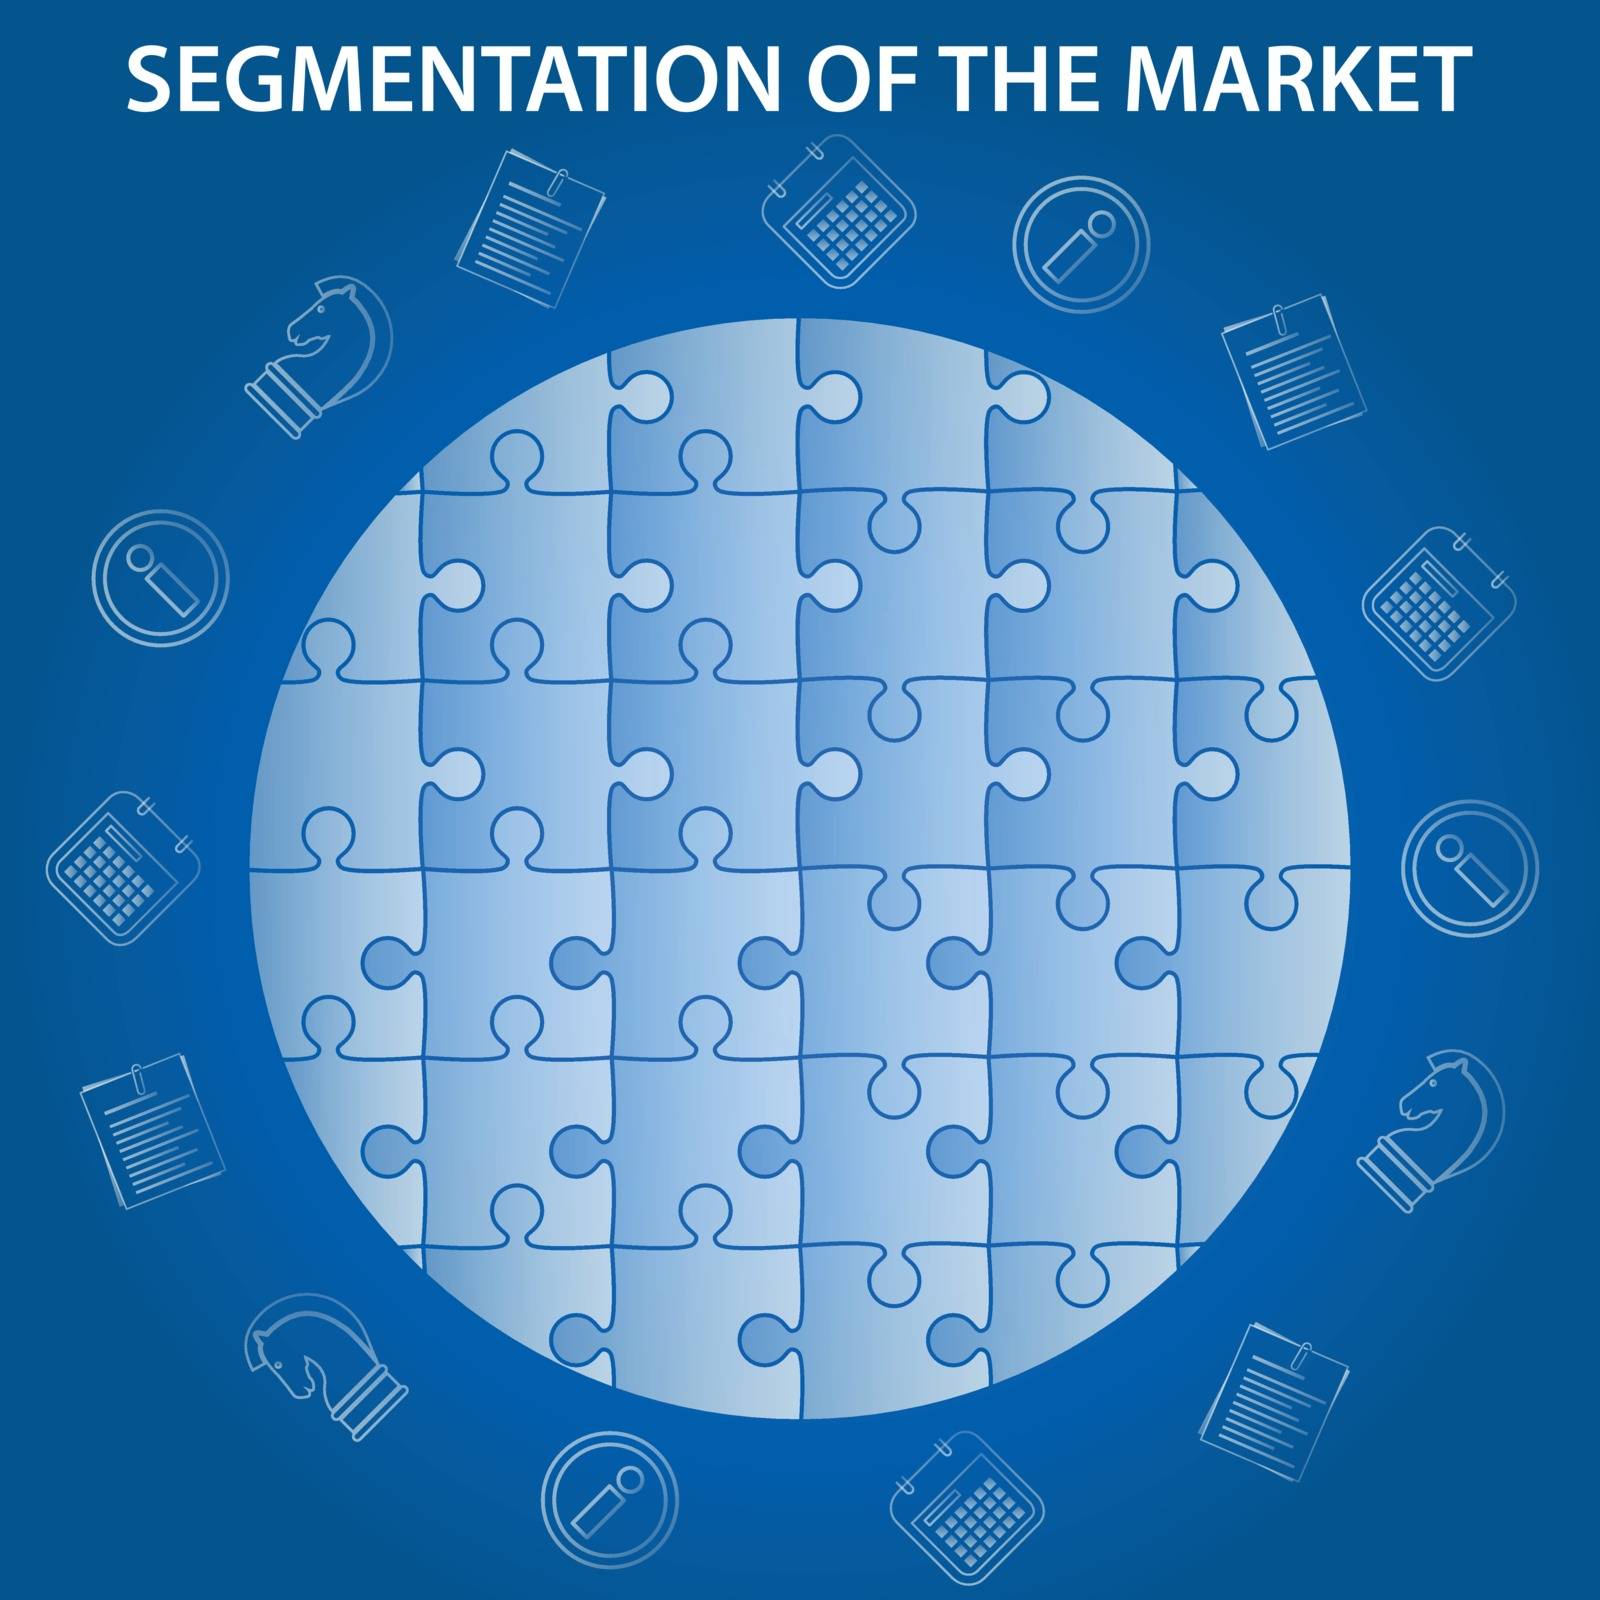 segmentation of market infographic on blue background - puzzle world globe with economic icons - strategy, info, document and planning diary